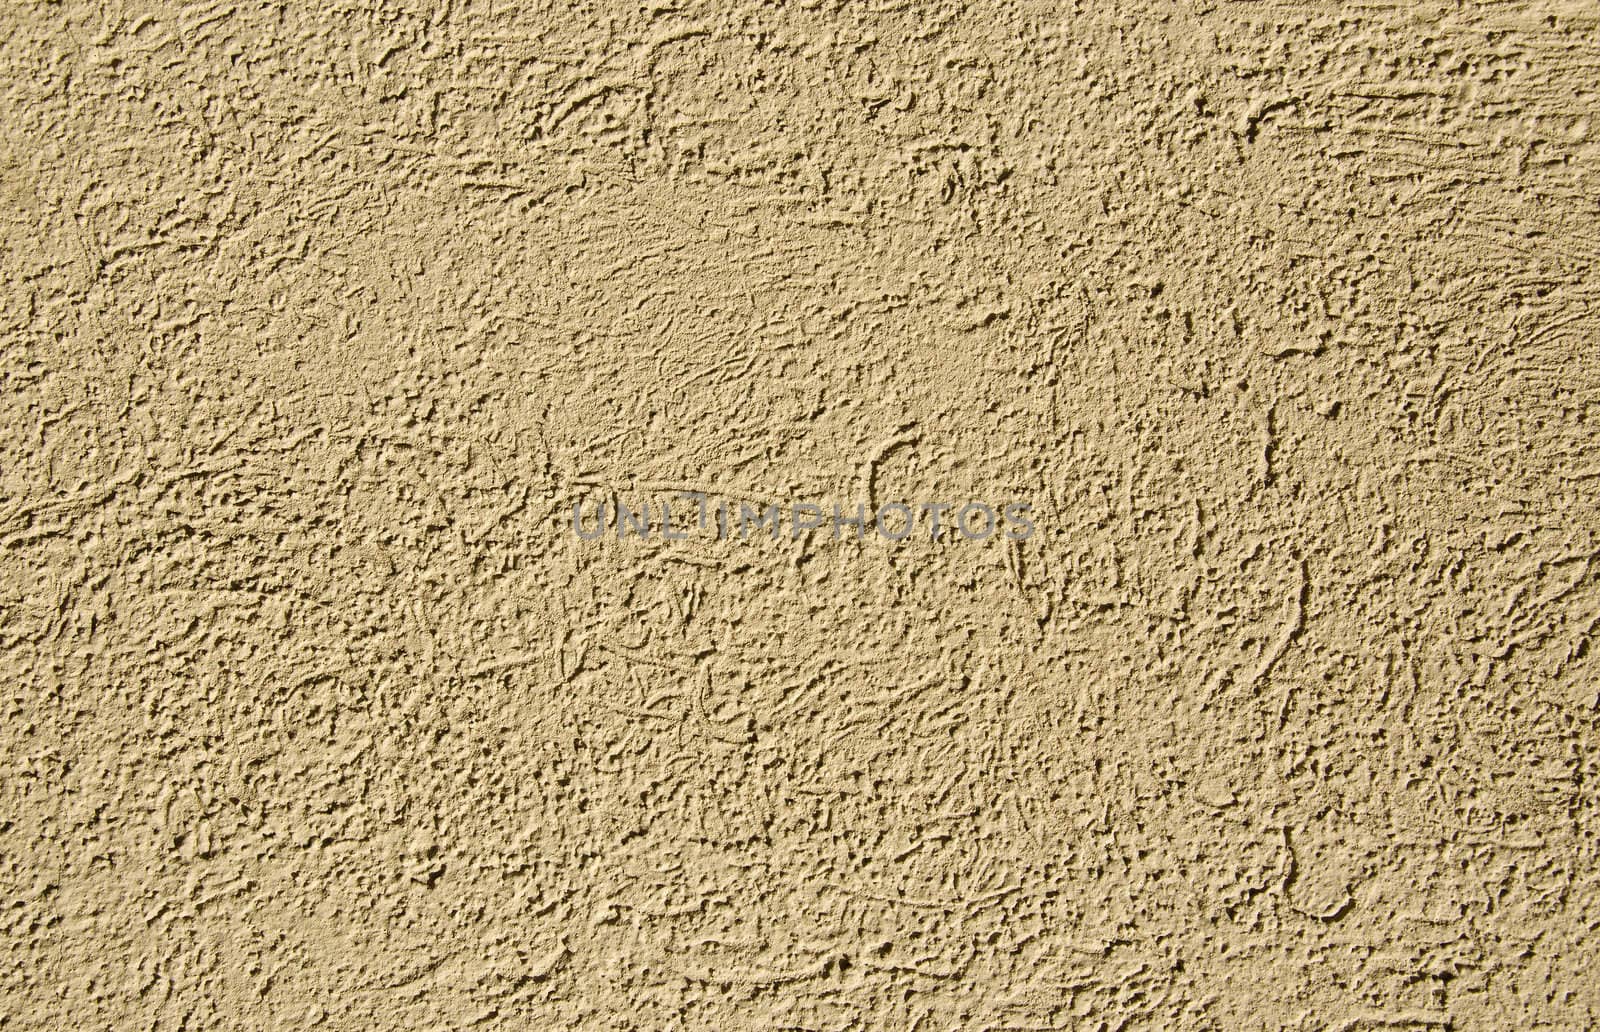 A closeup of painted textured concrete for a background.